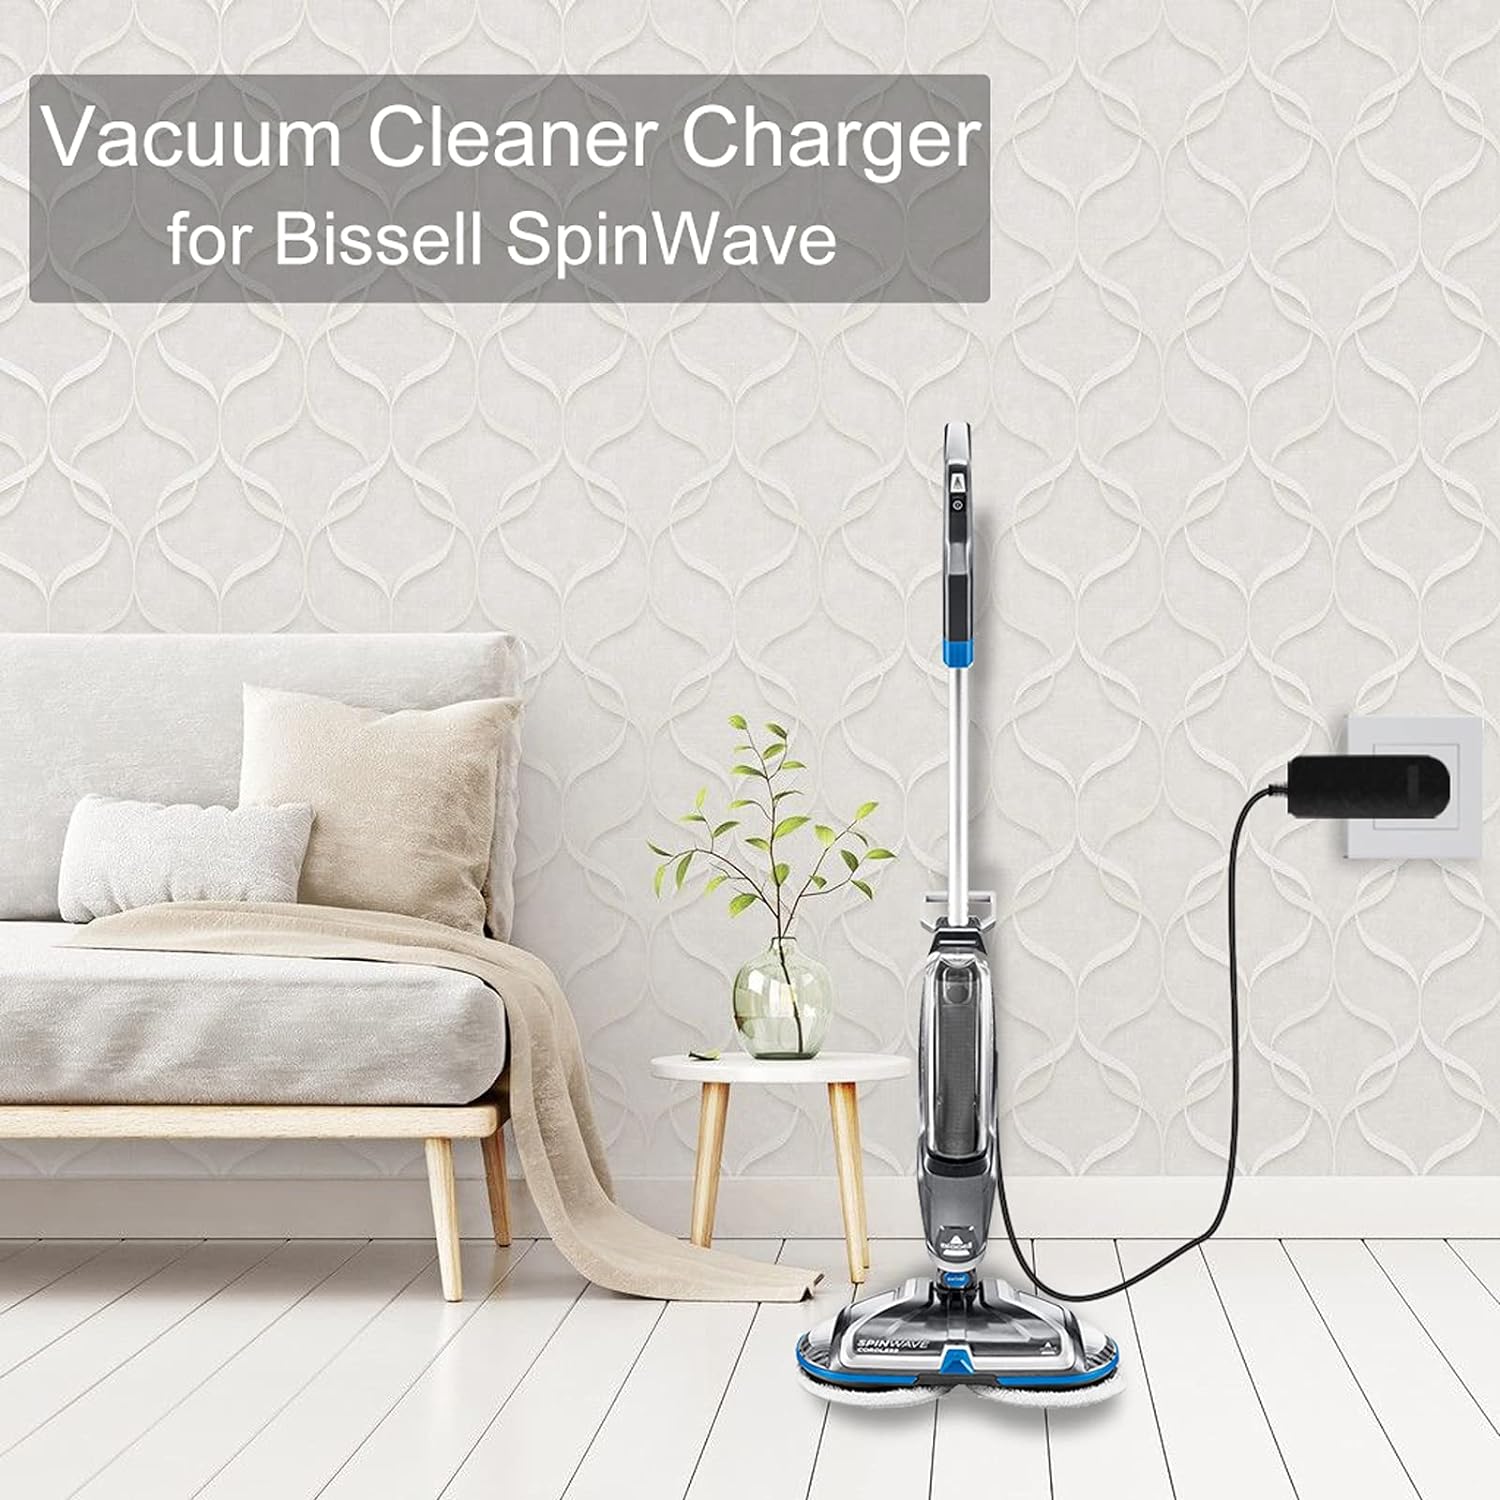 Charger for Bissell SpinWave Mop Power Cord Compatible with Bissell 2315/2315A/23157/23158/23159/2037, 1614563 Charging